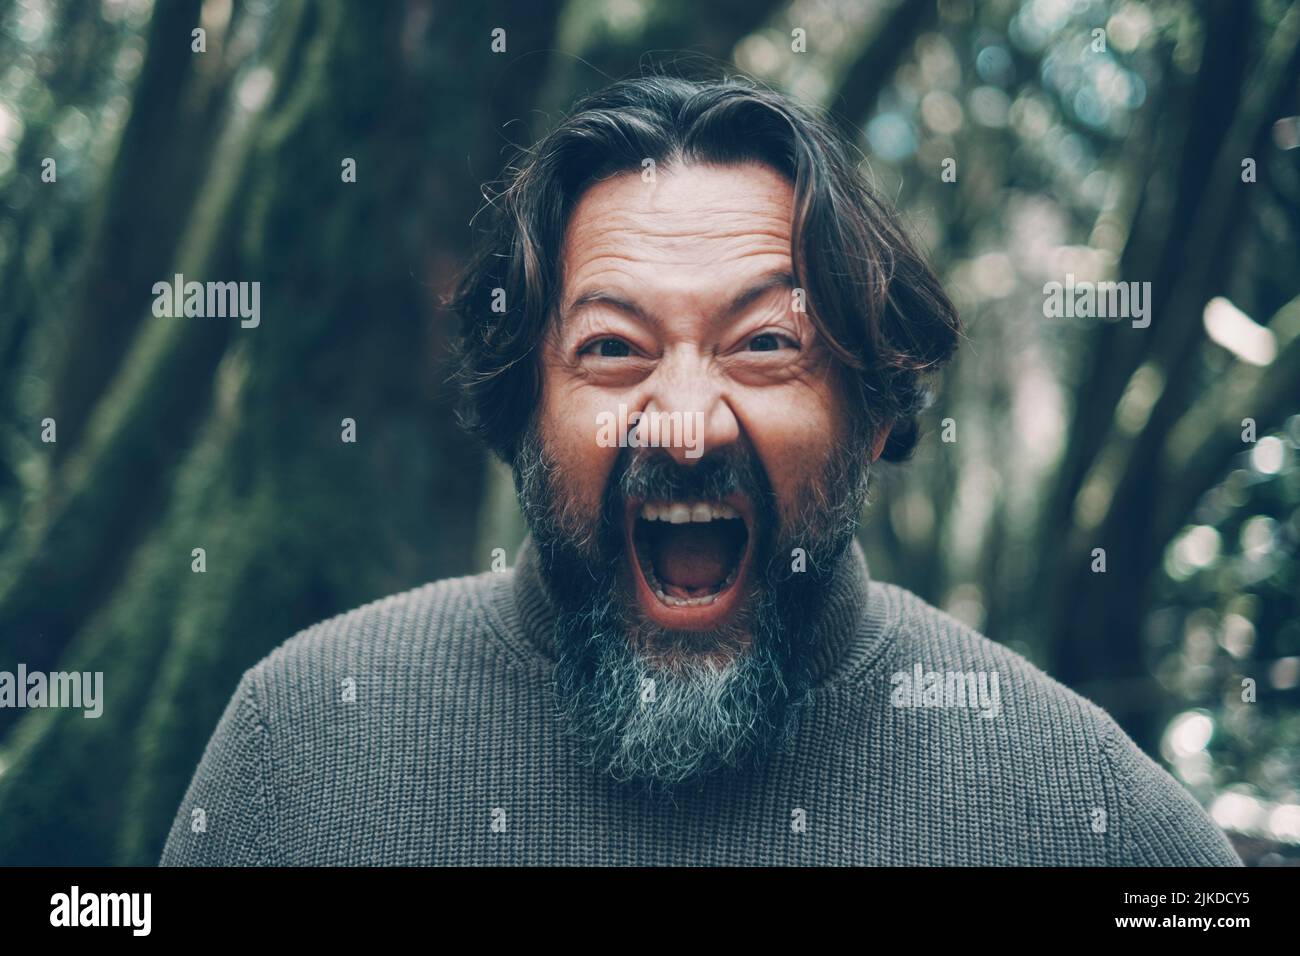 Mad mature man shouting crazy at the camera. Stressed people portrait concept life. Bearded young senior man shout with craziness and open mouth. Stock Photo